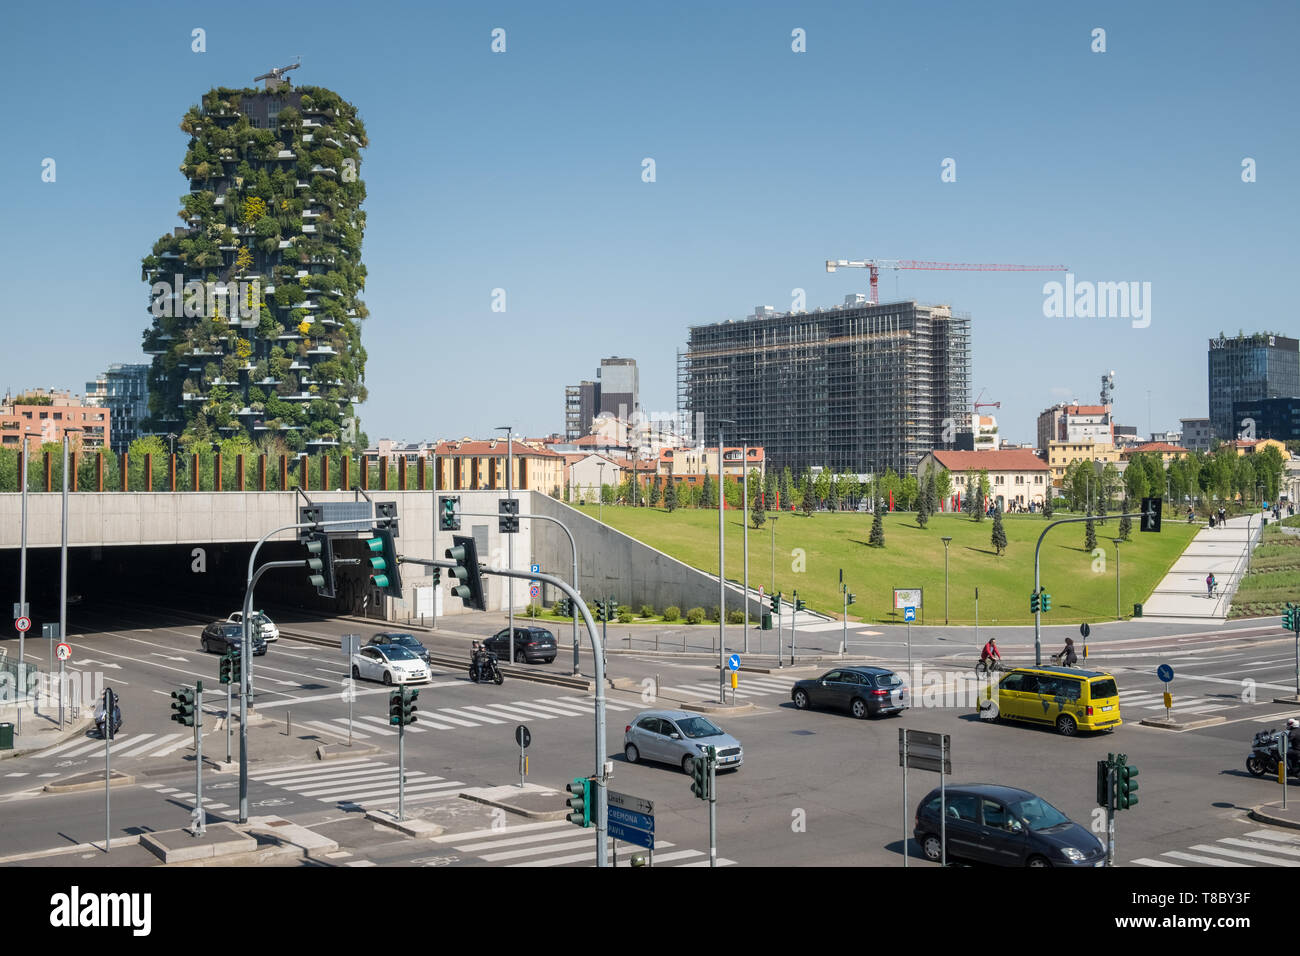 Porta Nuova regeneration street scene at road traffic intersection, with Bosco Verticale apartment buildings in the background, Milan, Italy Stock Photo